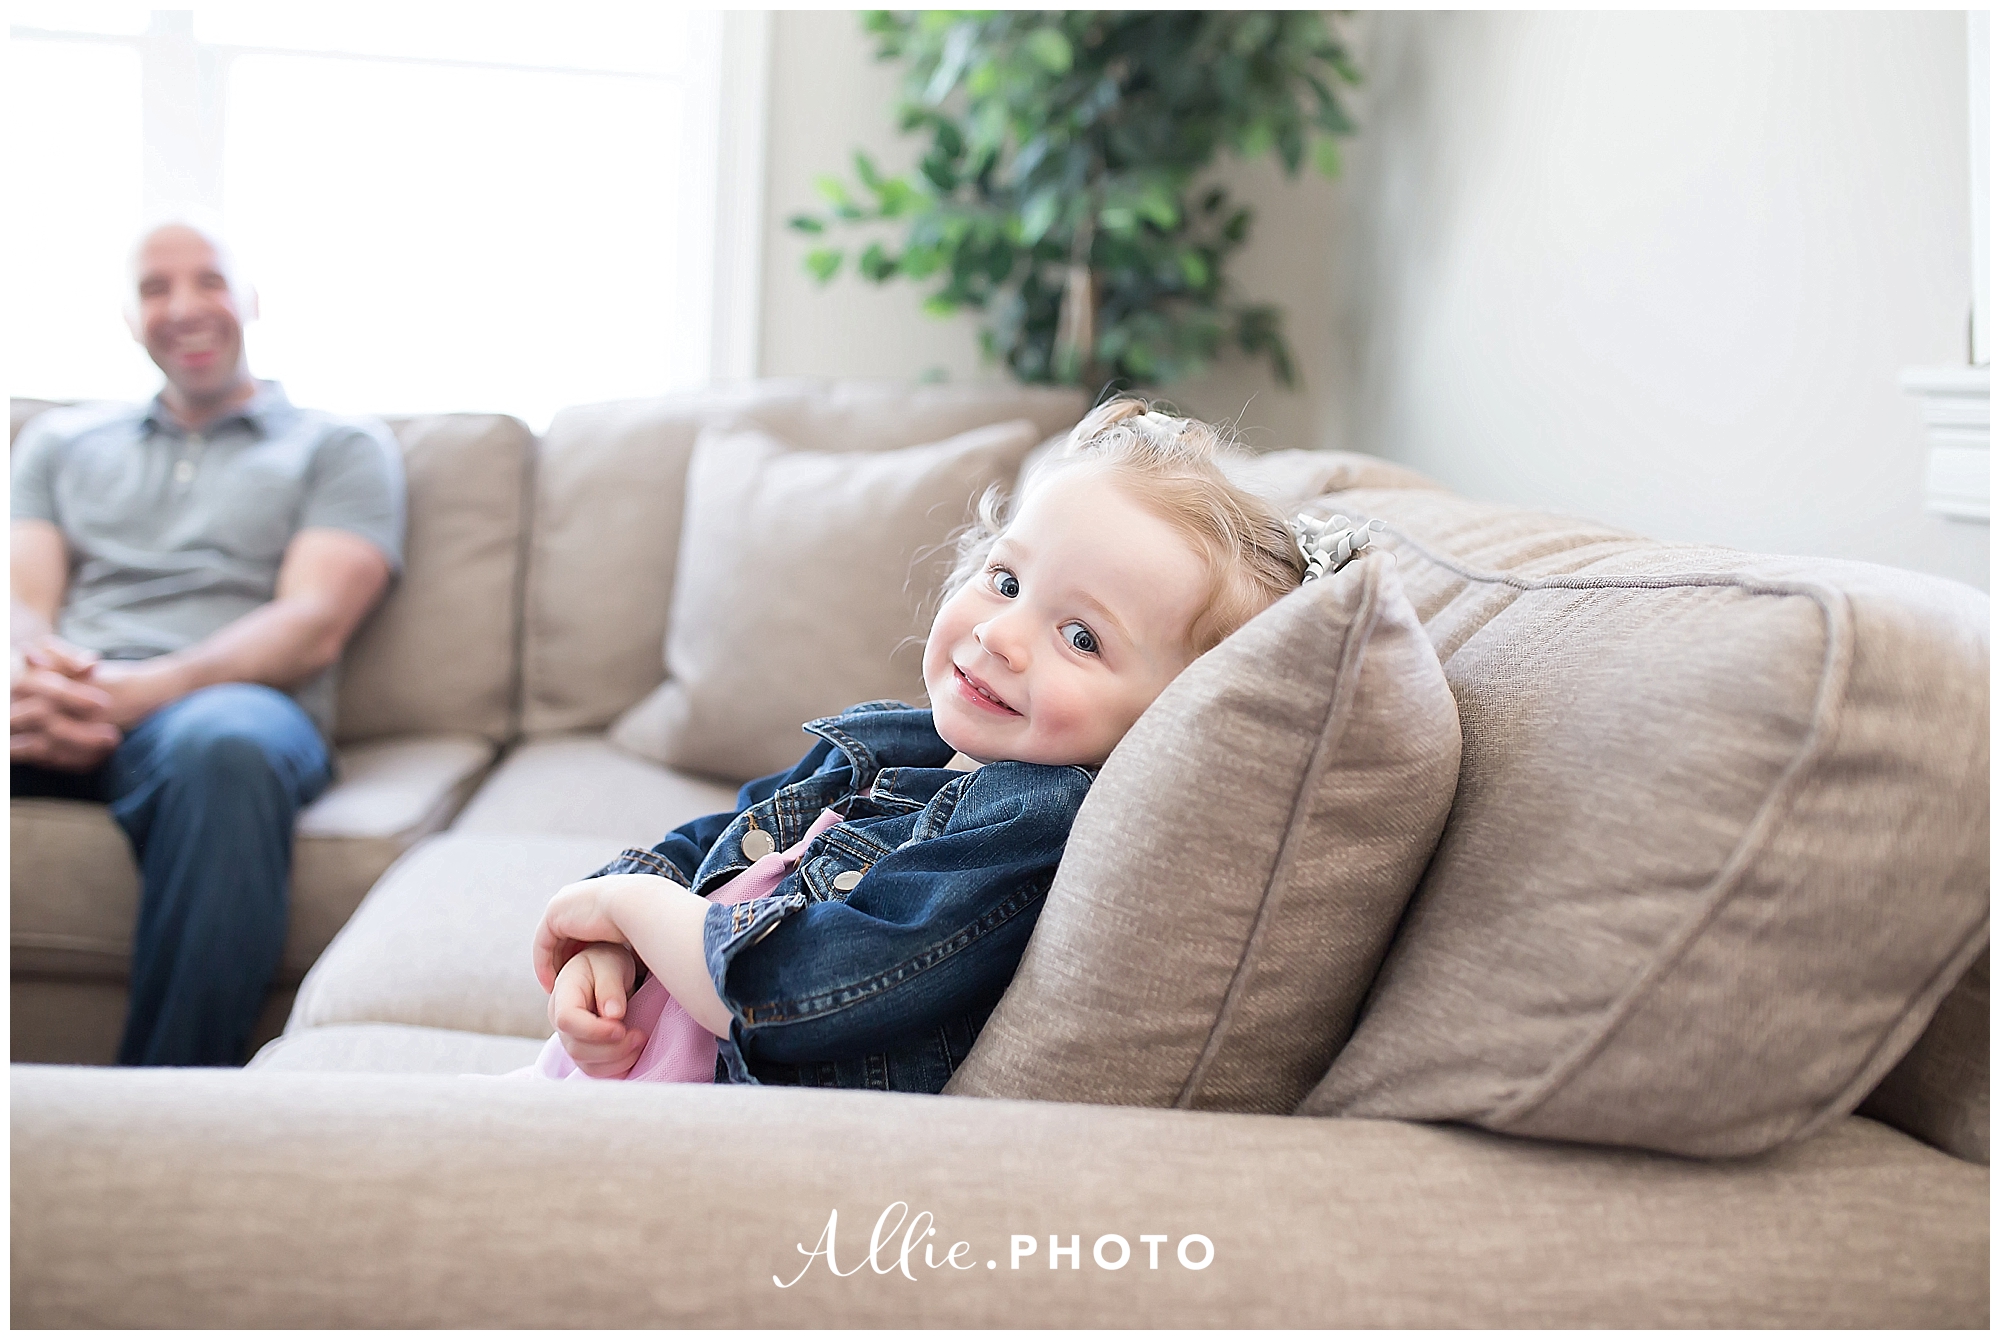 little_girl_at_home_lifestyle_photography_nh_family_001.jpg